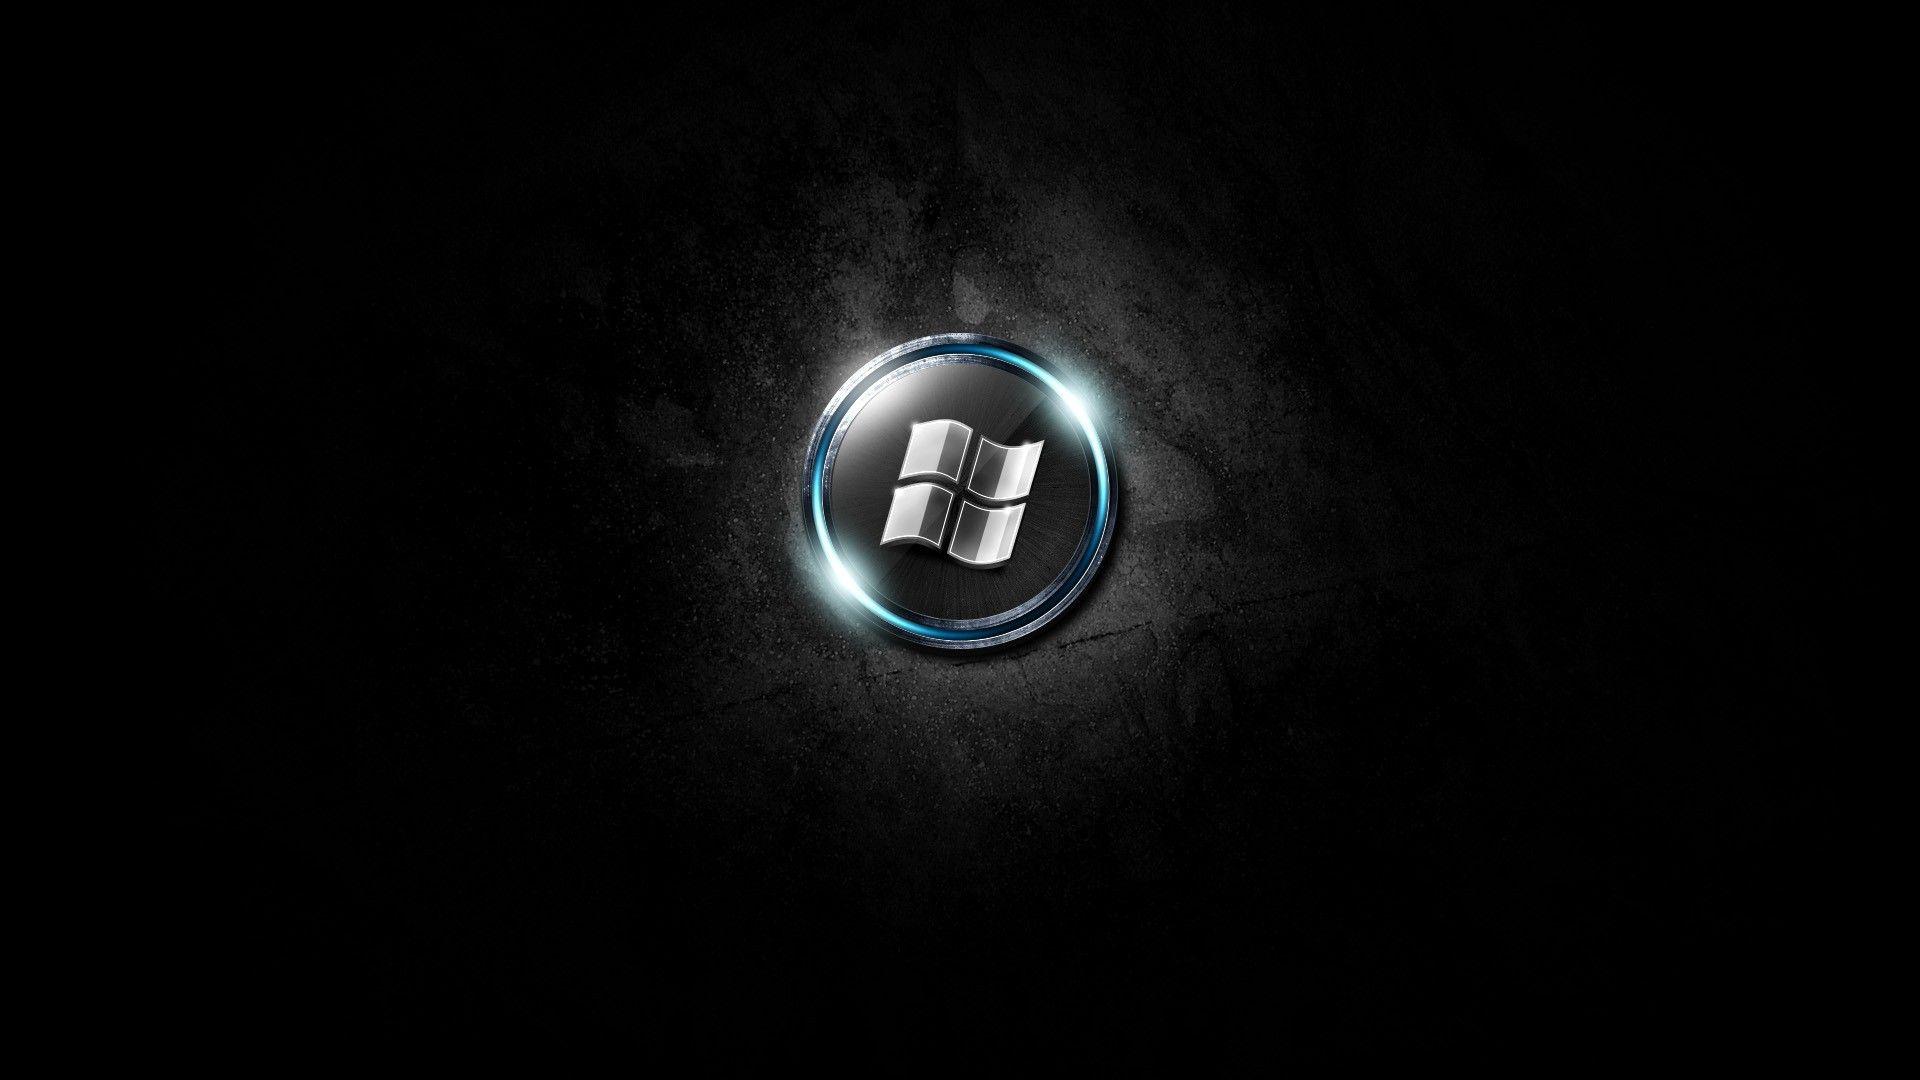 Windows 7 Full HD Wallpaper and Background Imagex1080